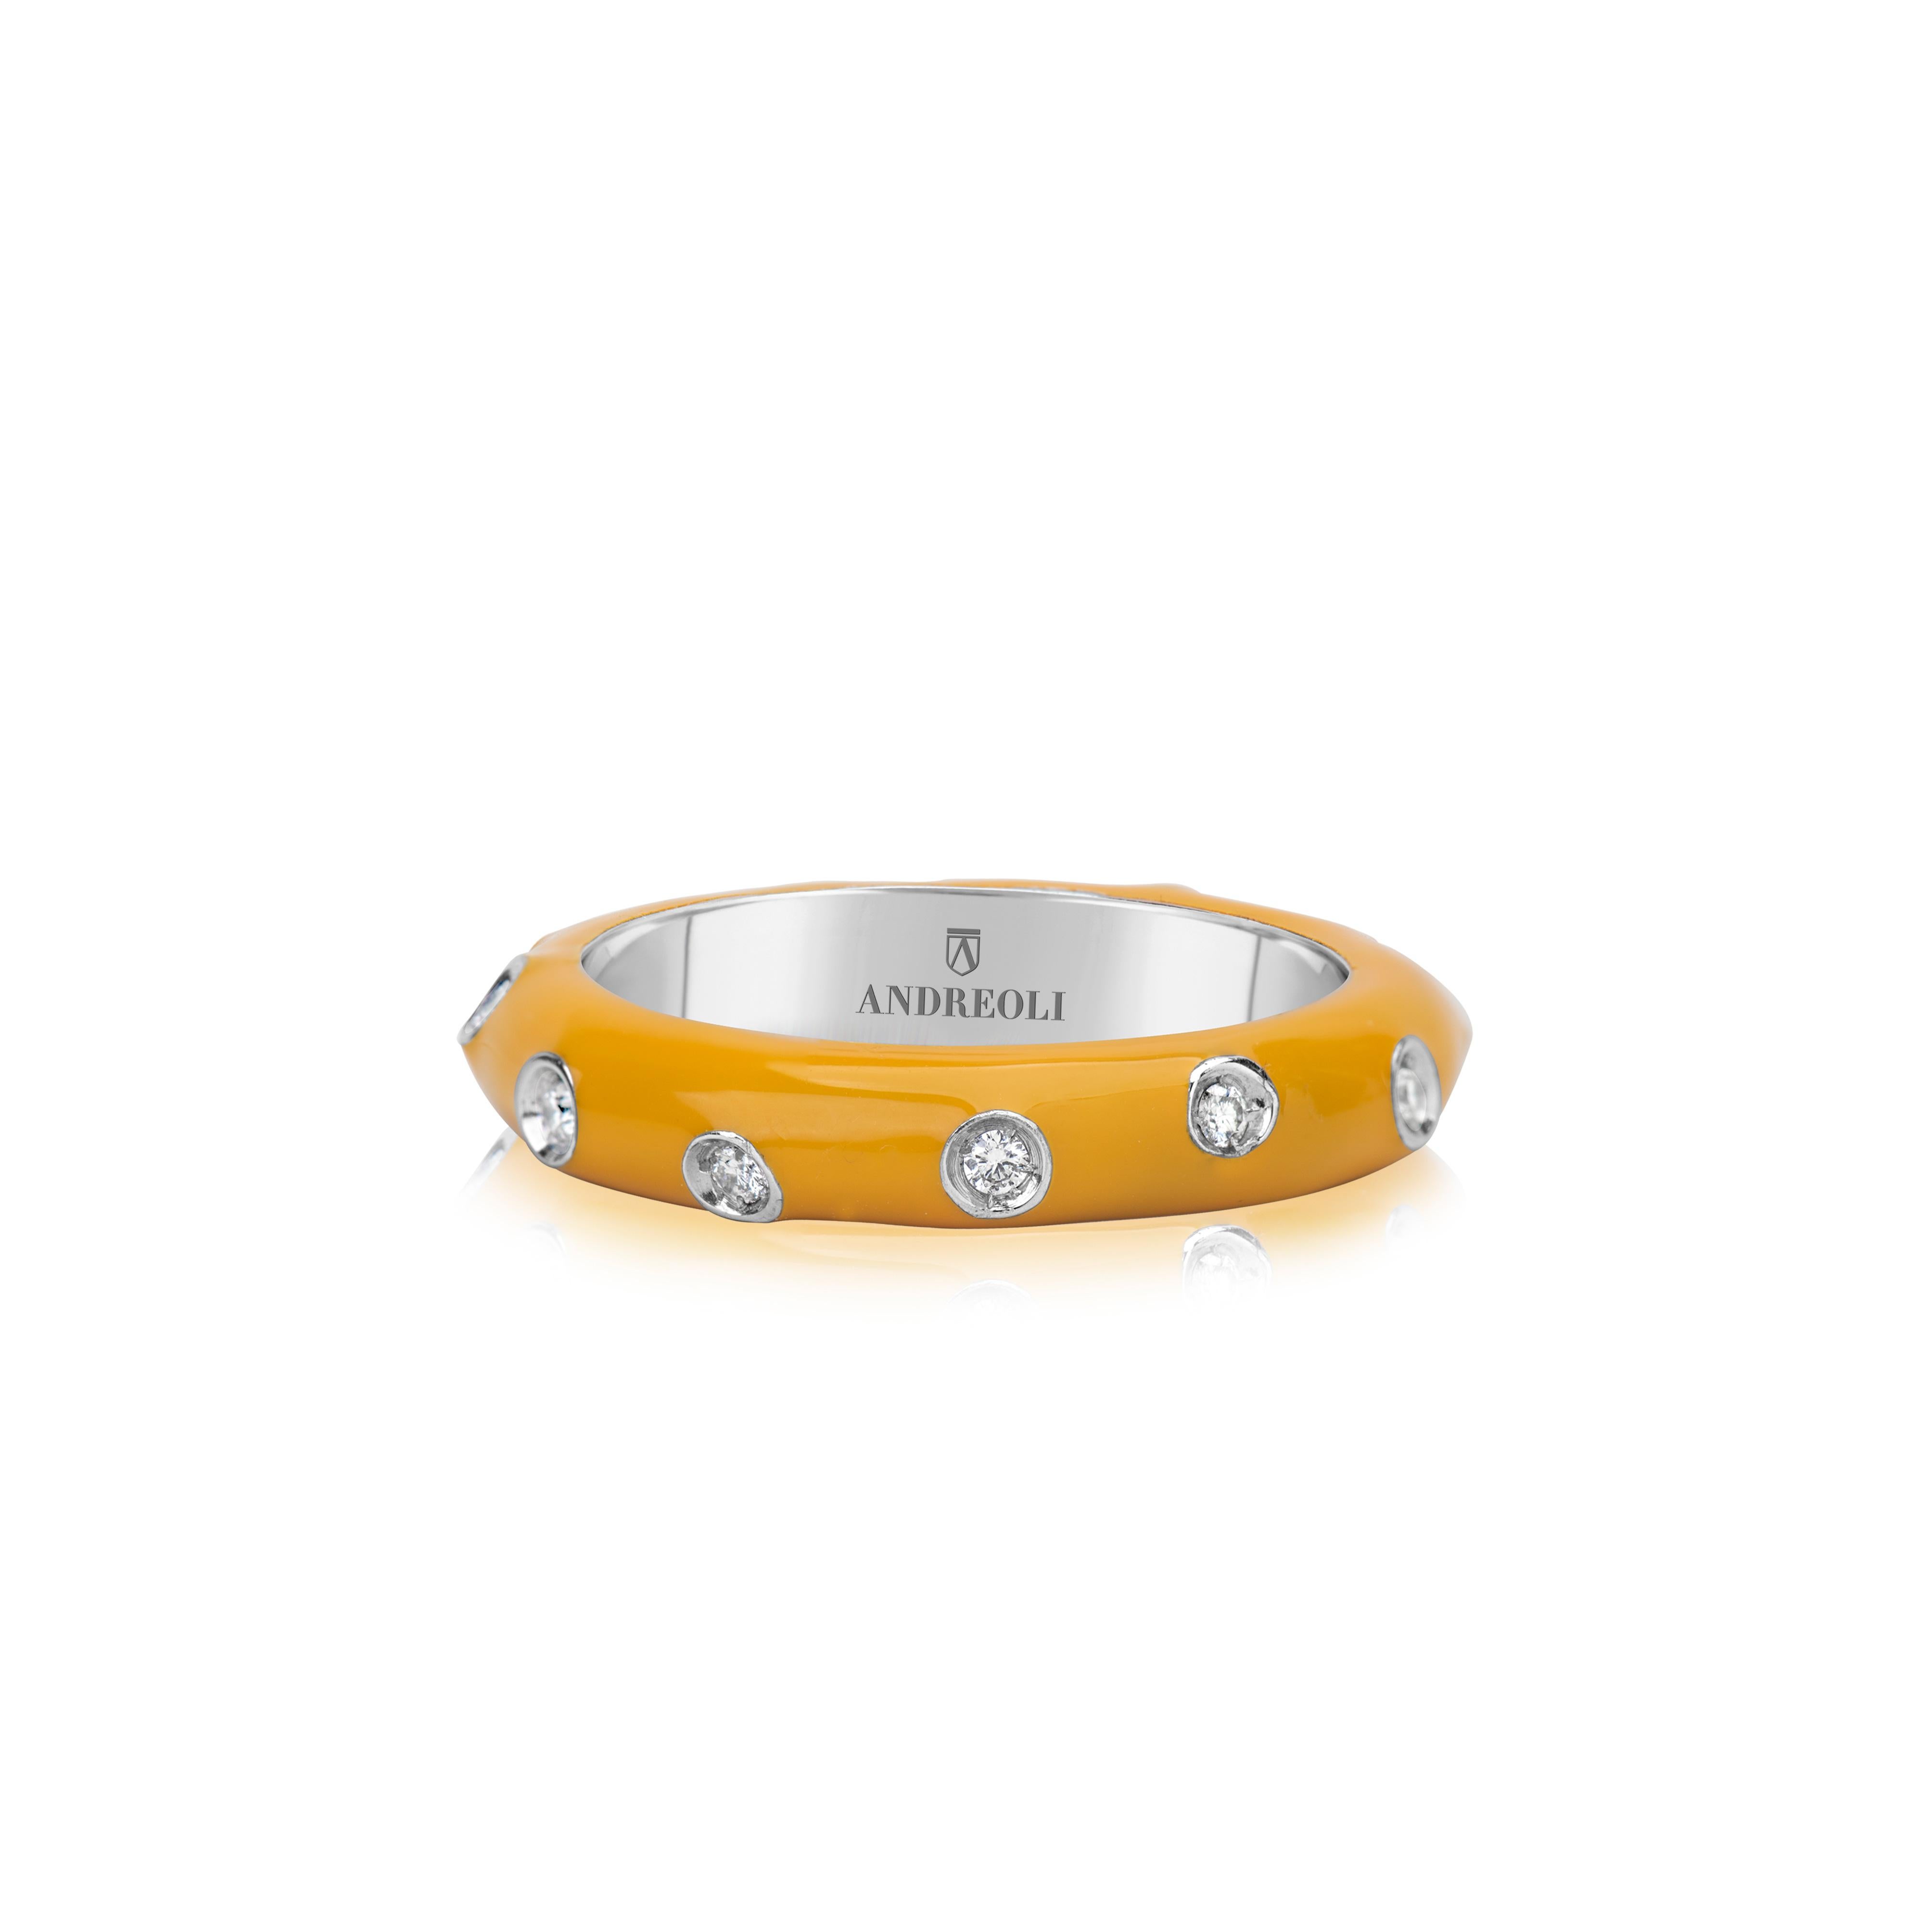 Andreoli Yellow Enamel Diamond Band Ring 18k White Gold

This Andreoli ring features:
- 0.17 carat diamond
- 9.10 gram 18 karat white gold
- Yellow Enamel
- Made in Italy
- Ring Size 7.00